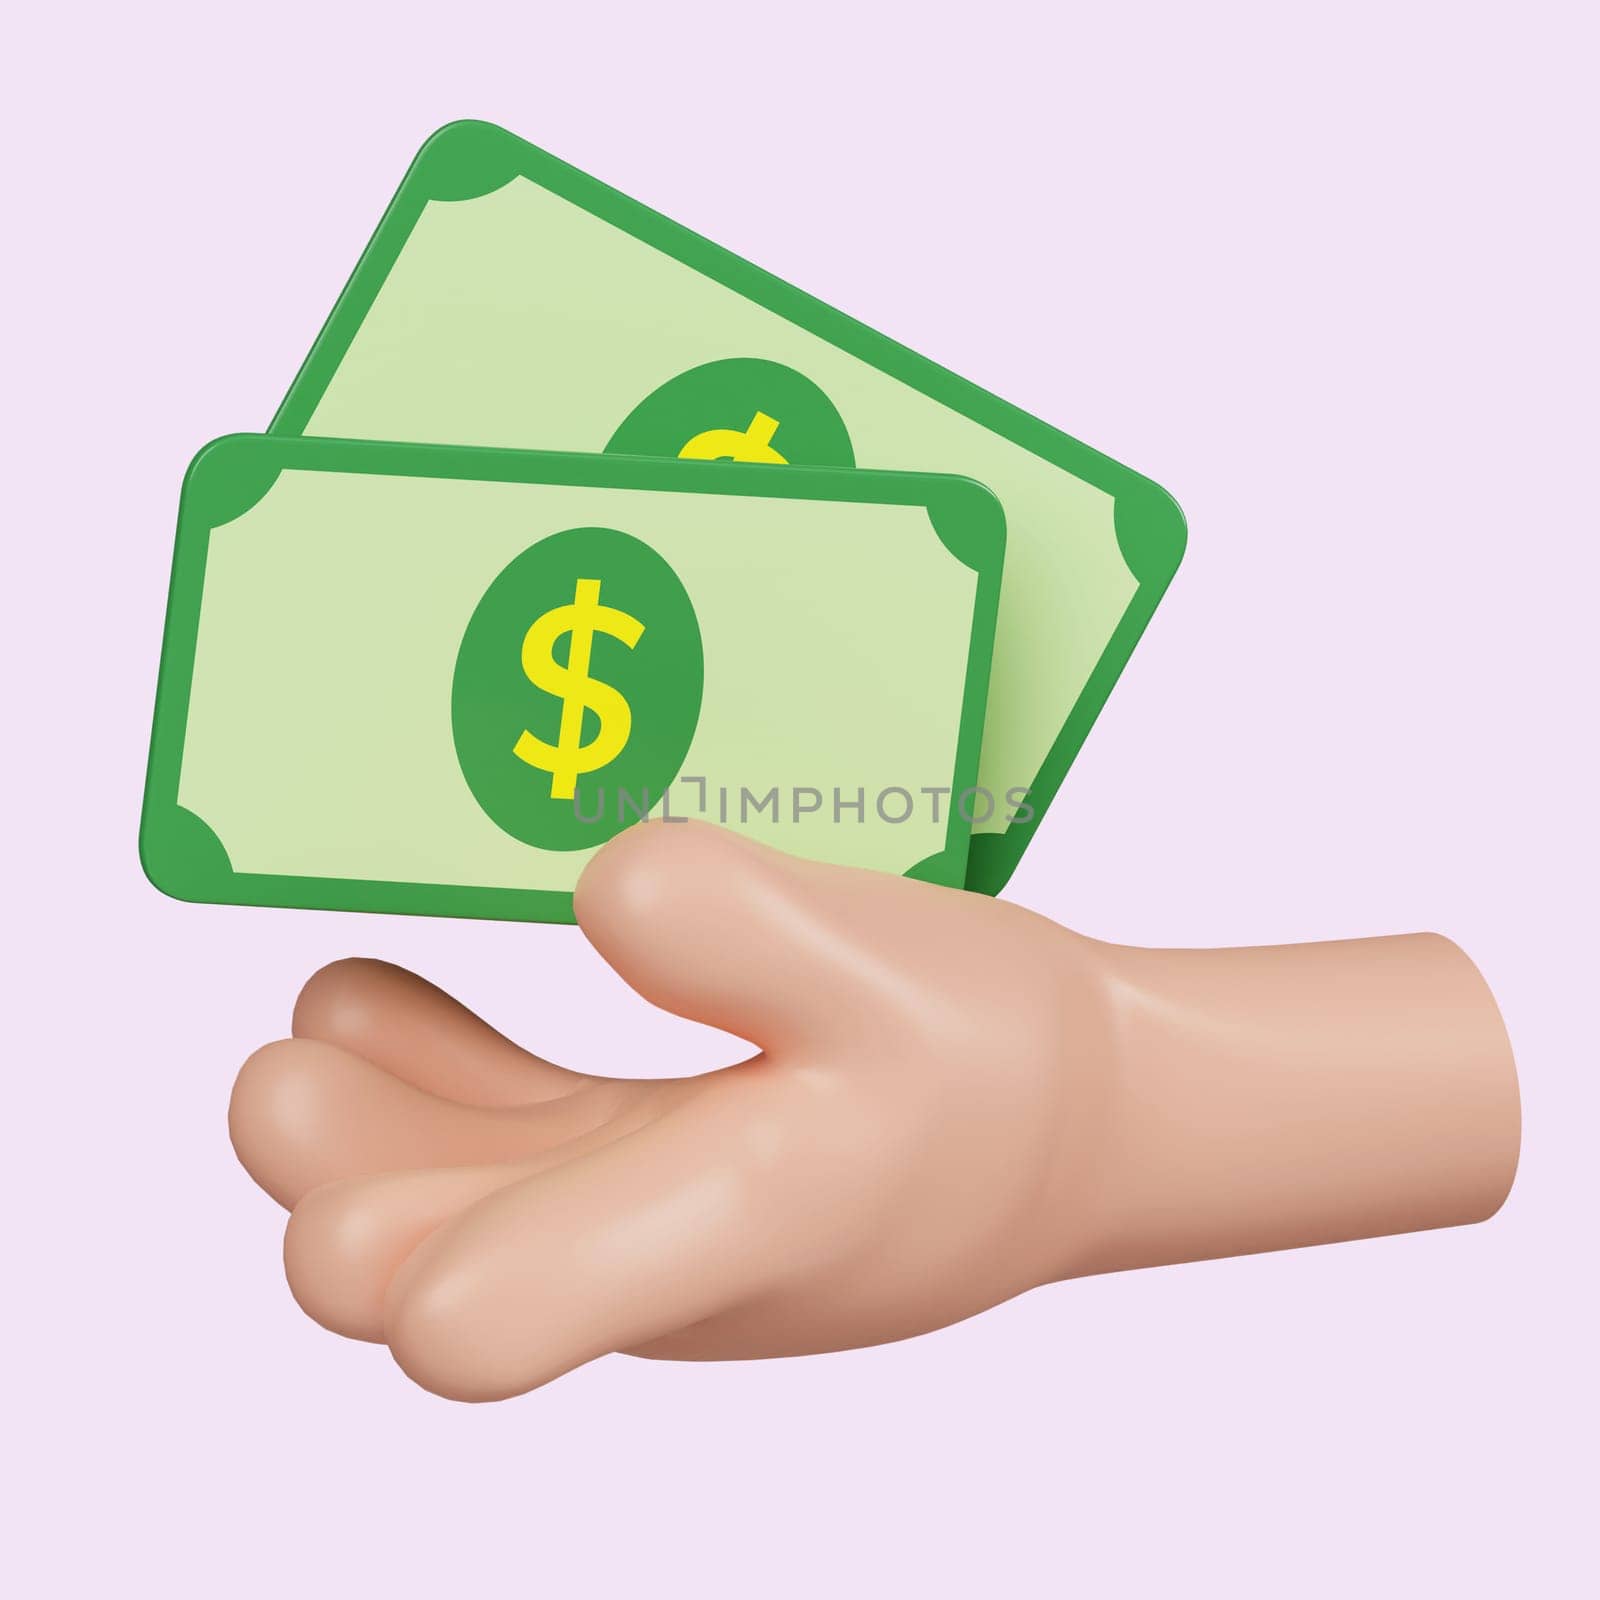 3d hand holding money. payment concept. finance, investment, money saving on hand. icon isolated on pink background. 3d rendering illustration. Clipping path. by meepiangraphic